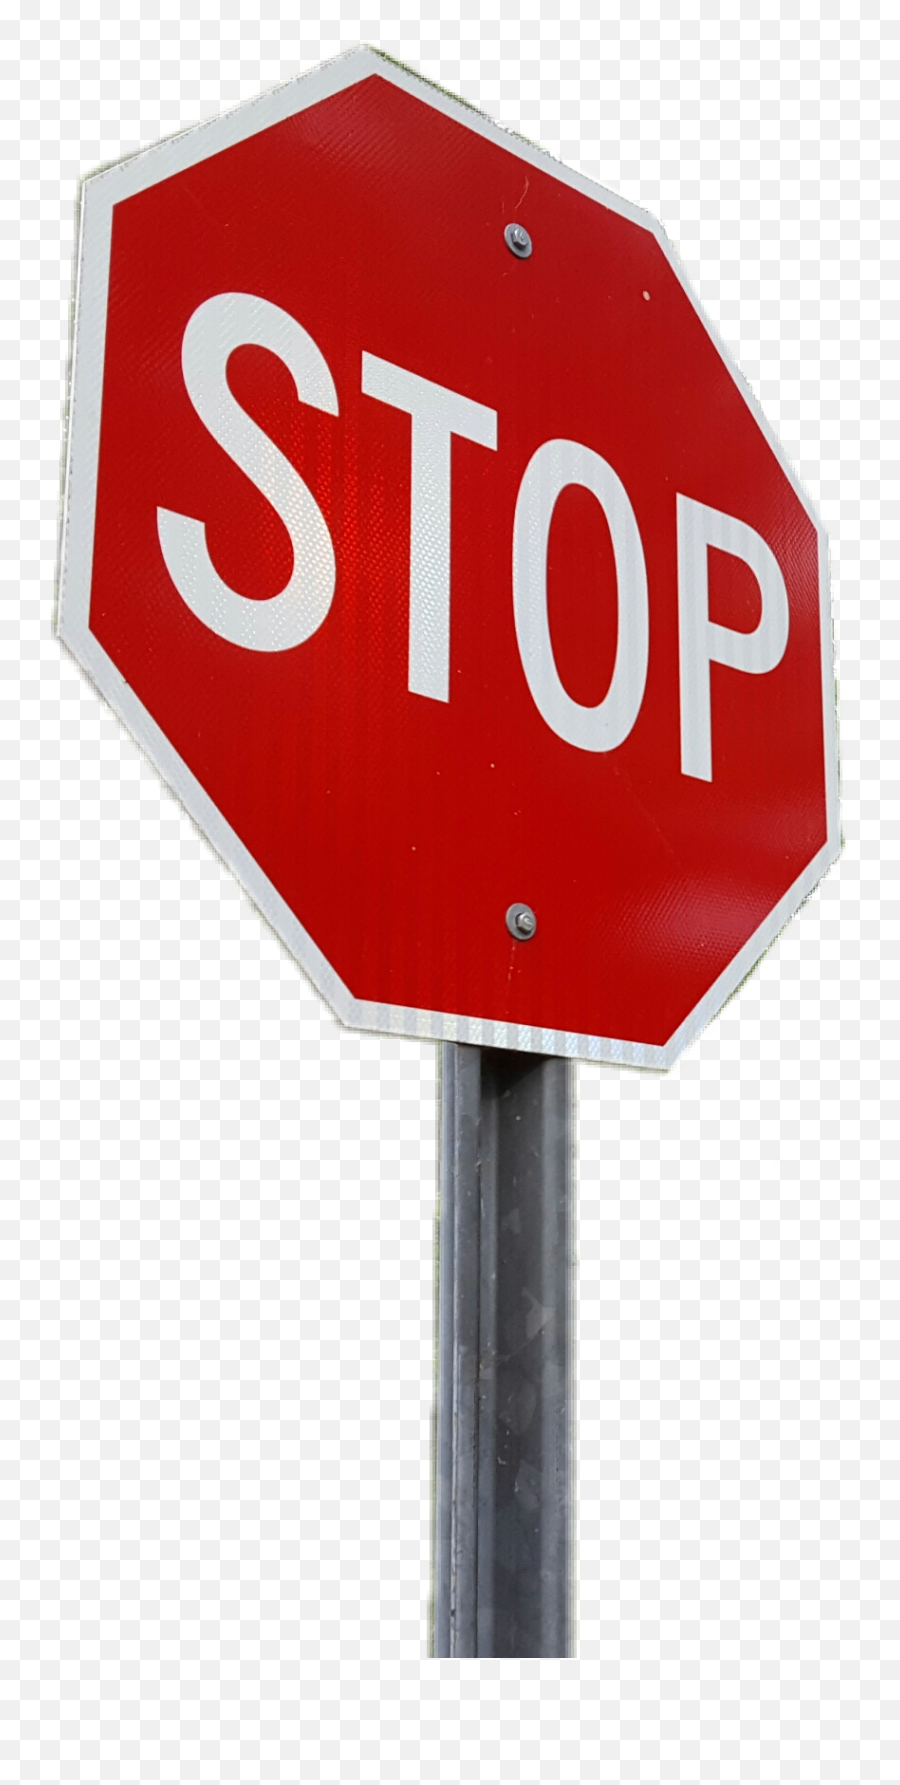 Thanks For The Super Awesome Original Fte Photo Sto - Stop Sign Png,Stop Sign Transparent